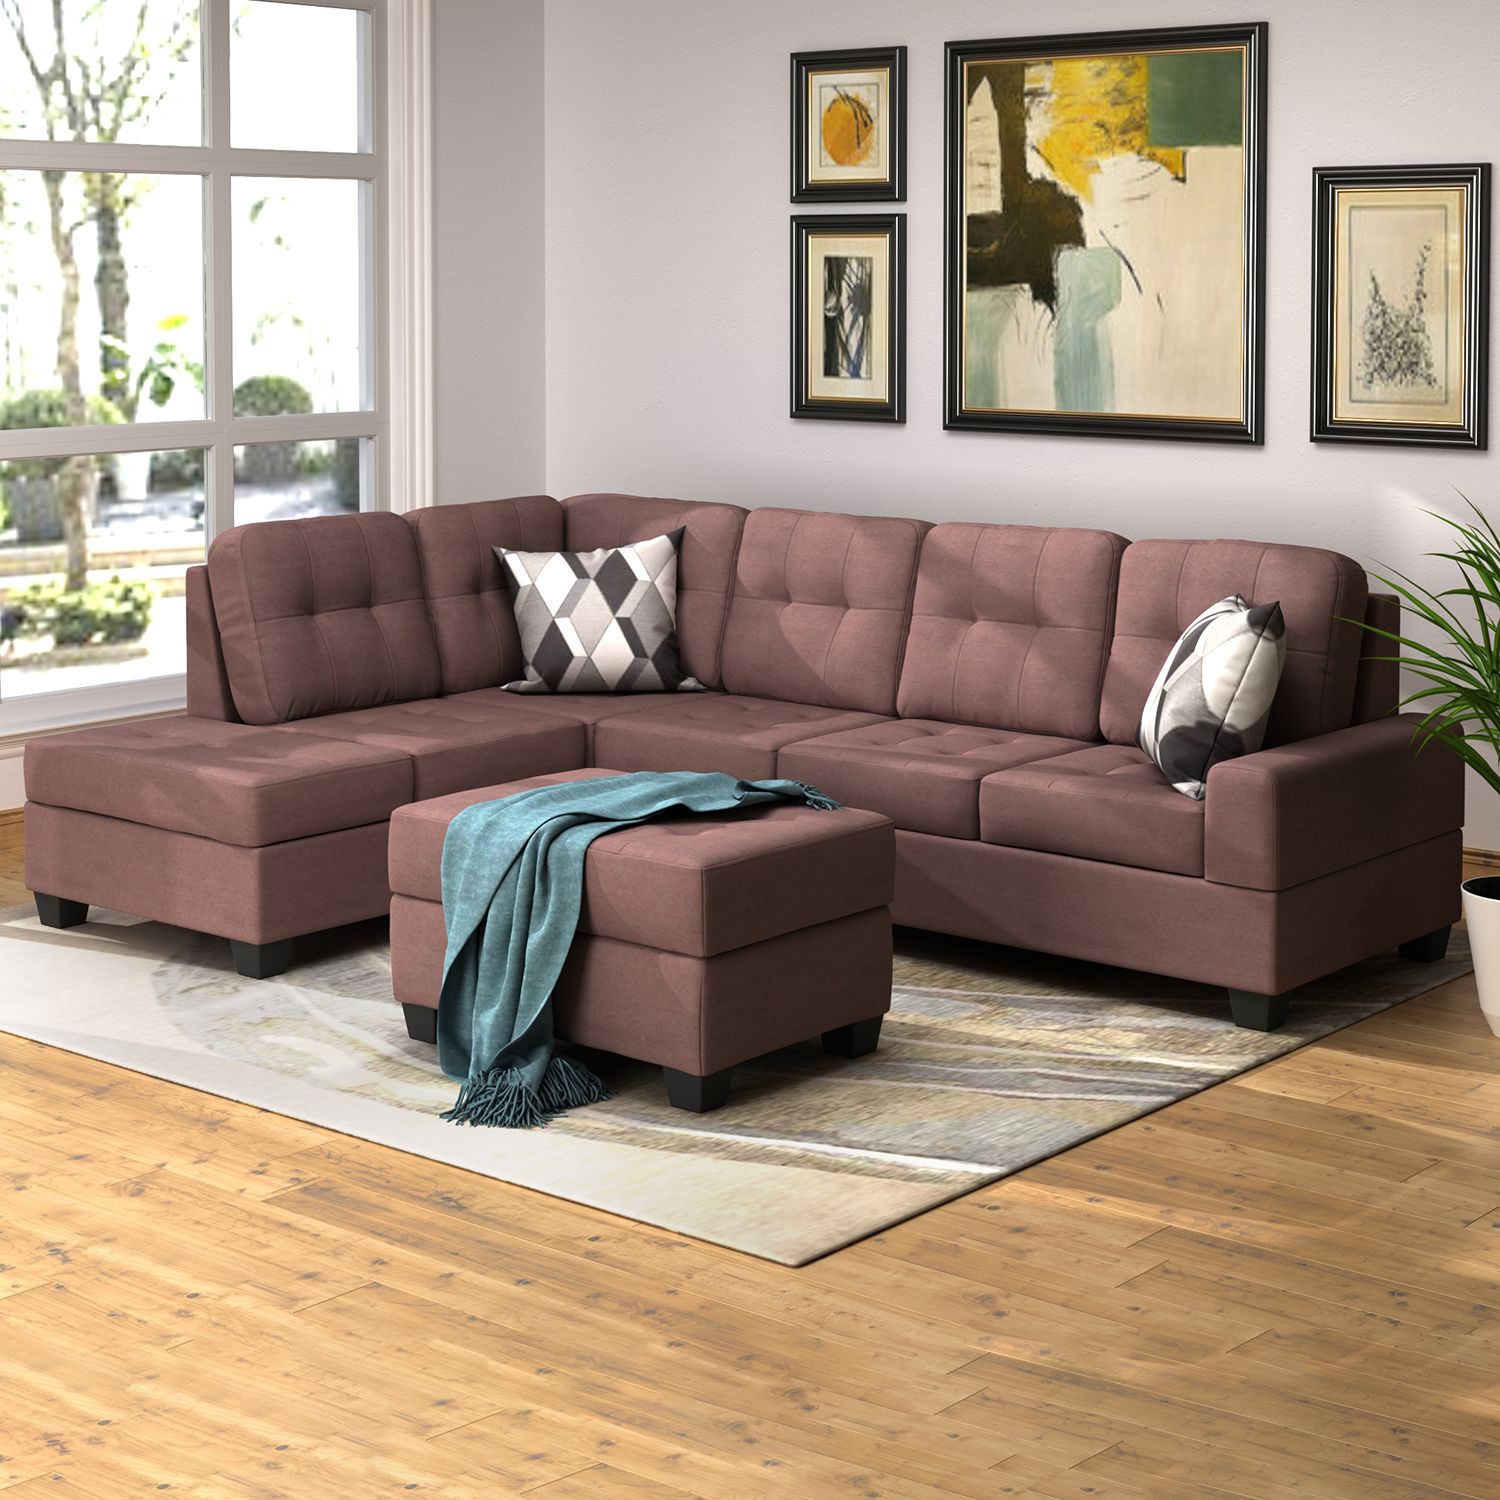 3 Piece Sectional Sofa Microfiber With Reversible Chaise Pertaining To Copenhagen Reversible Small Space Sectional Sofas With Storage (View 9 of 15)